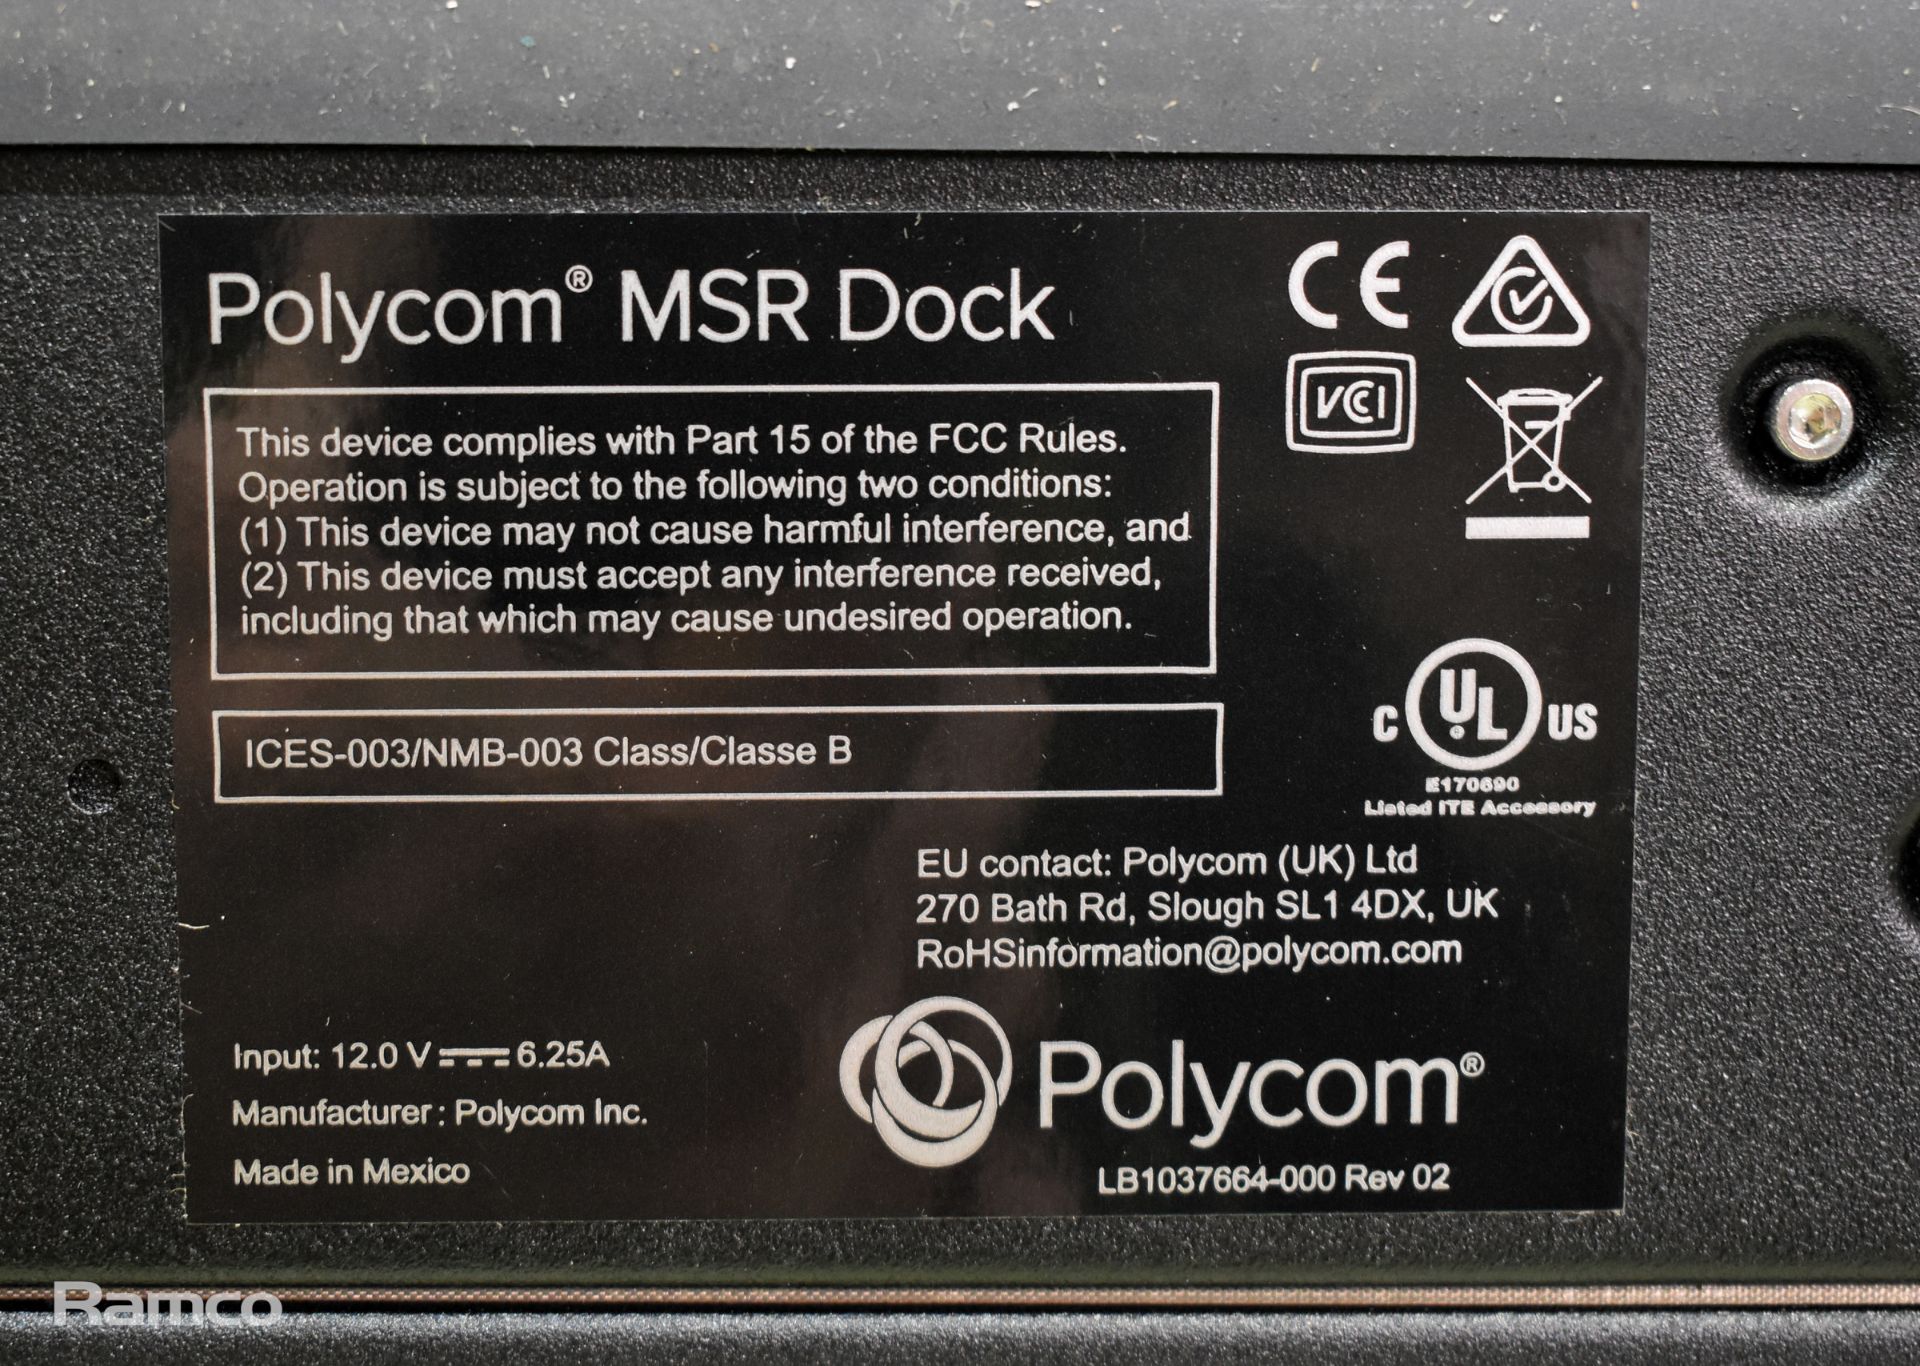 4x Polycom MSR docking systems for Microsoft Surface Pro - Image 5 of 6